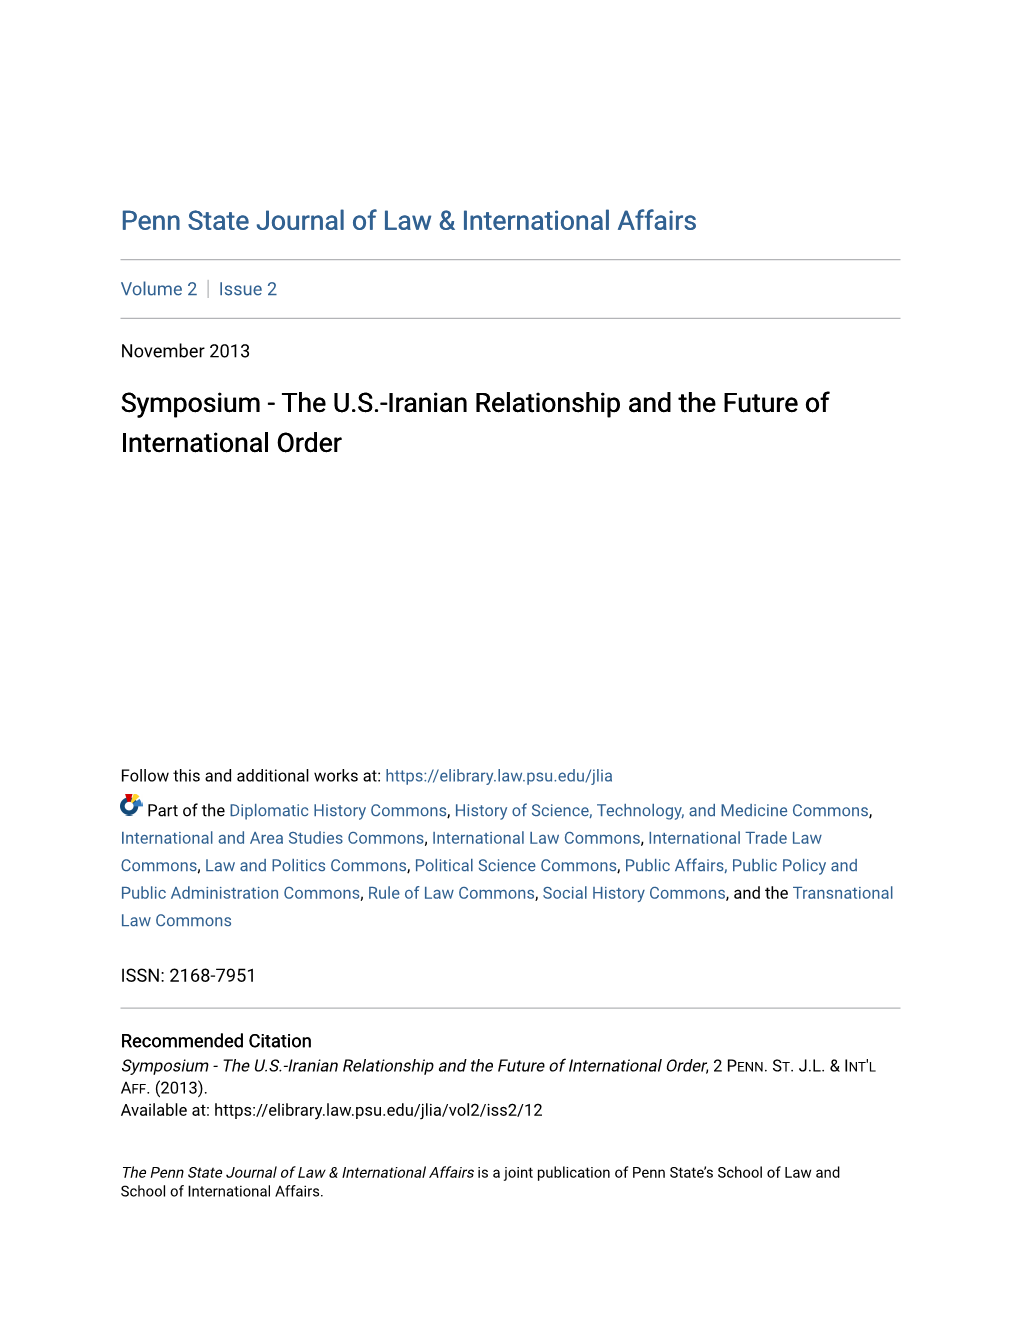 The US-Iranian Relationship and the Future of International Order